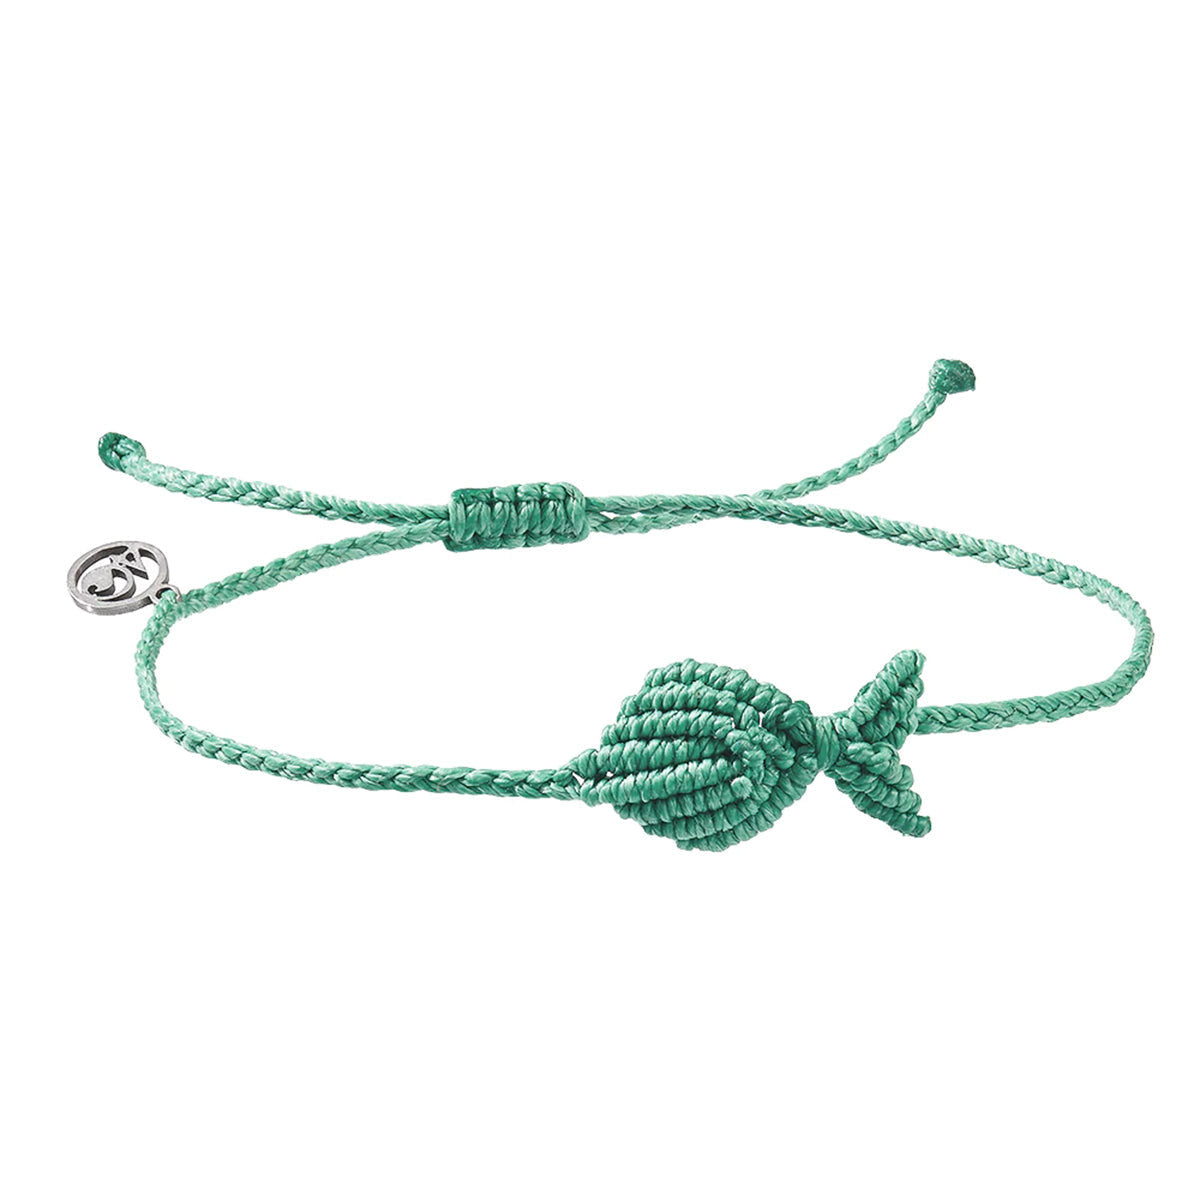 4Ocean Go Fish Anklet - Avenue Clothing Company 